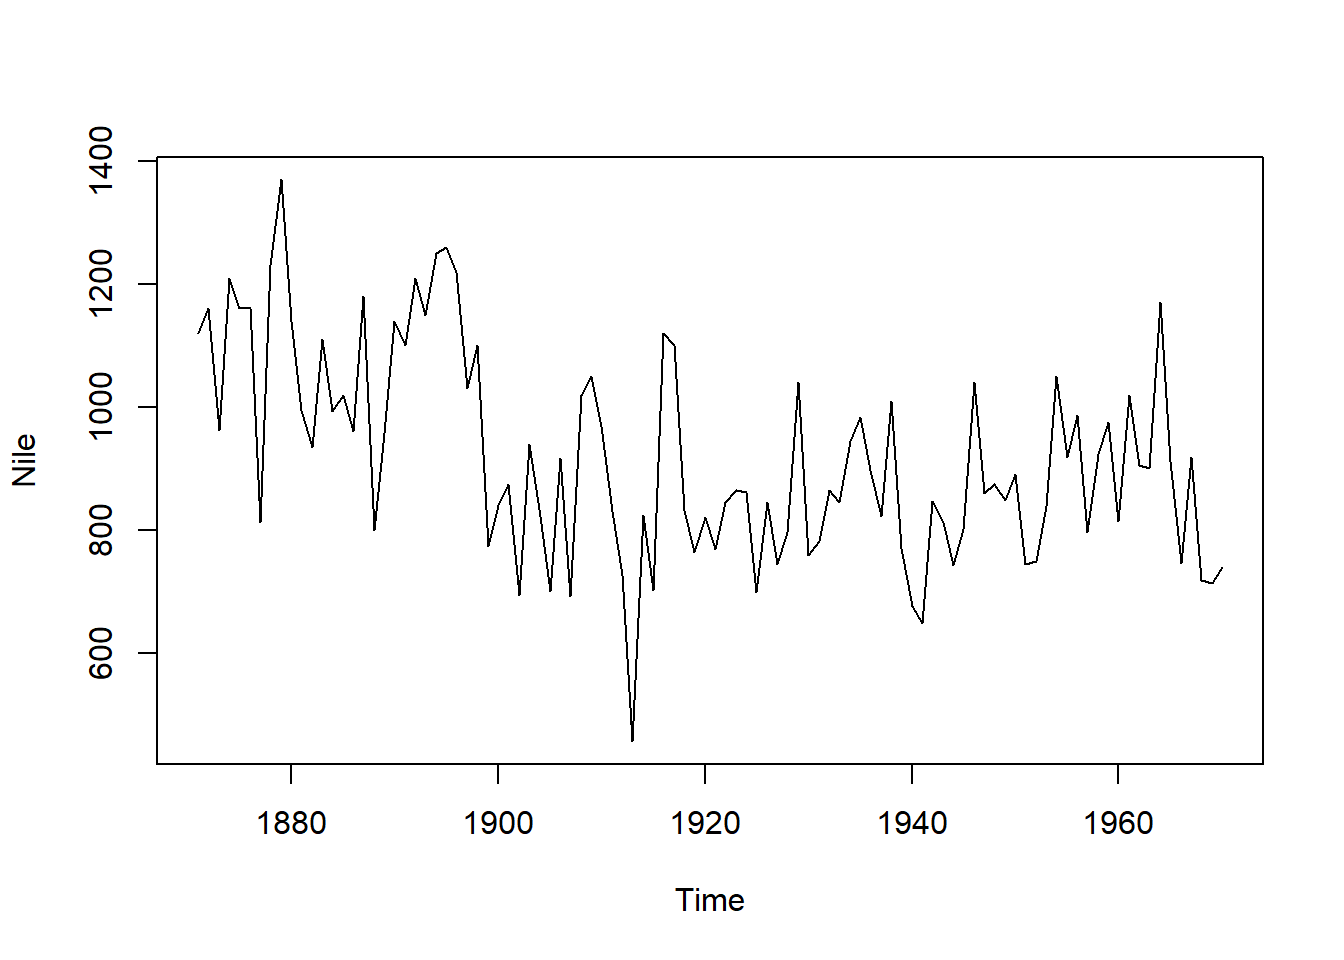 Time series of Nile River flows